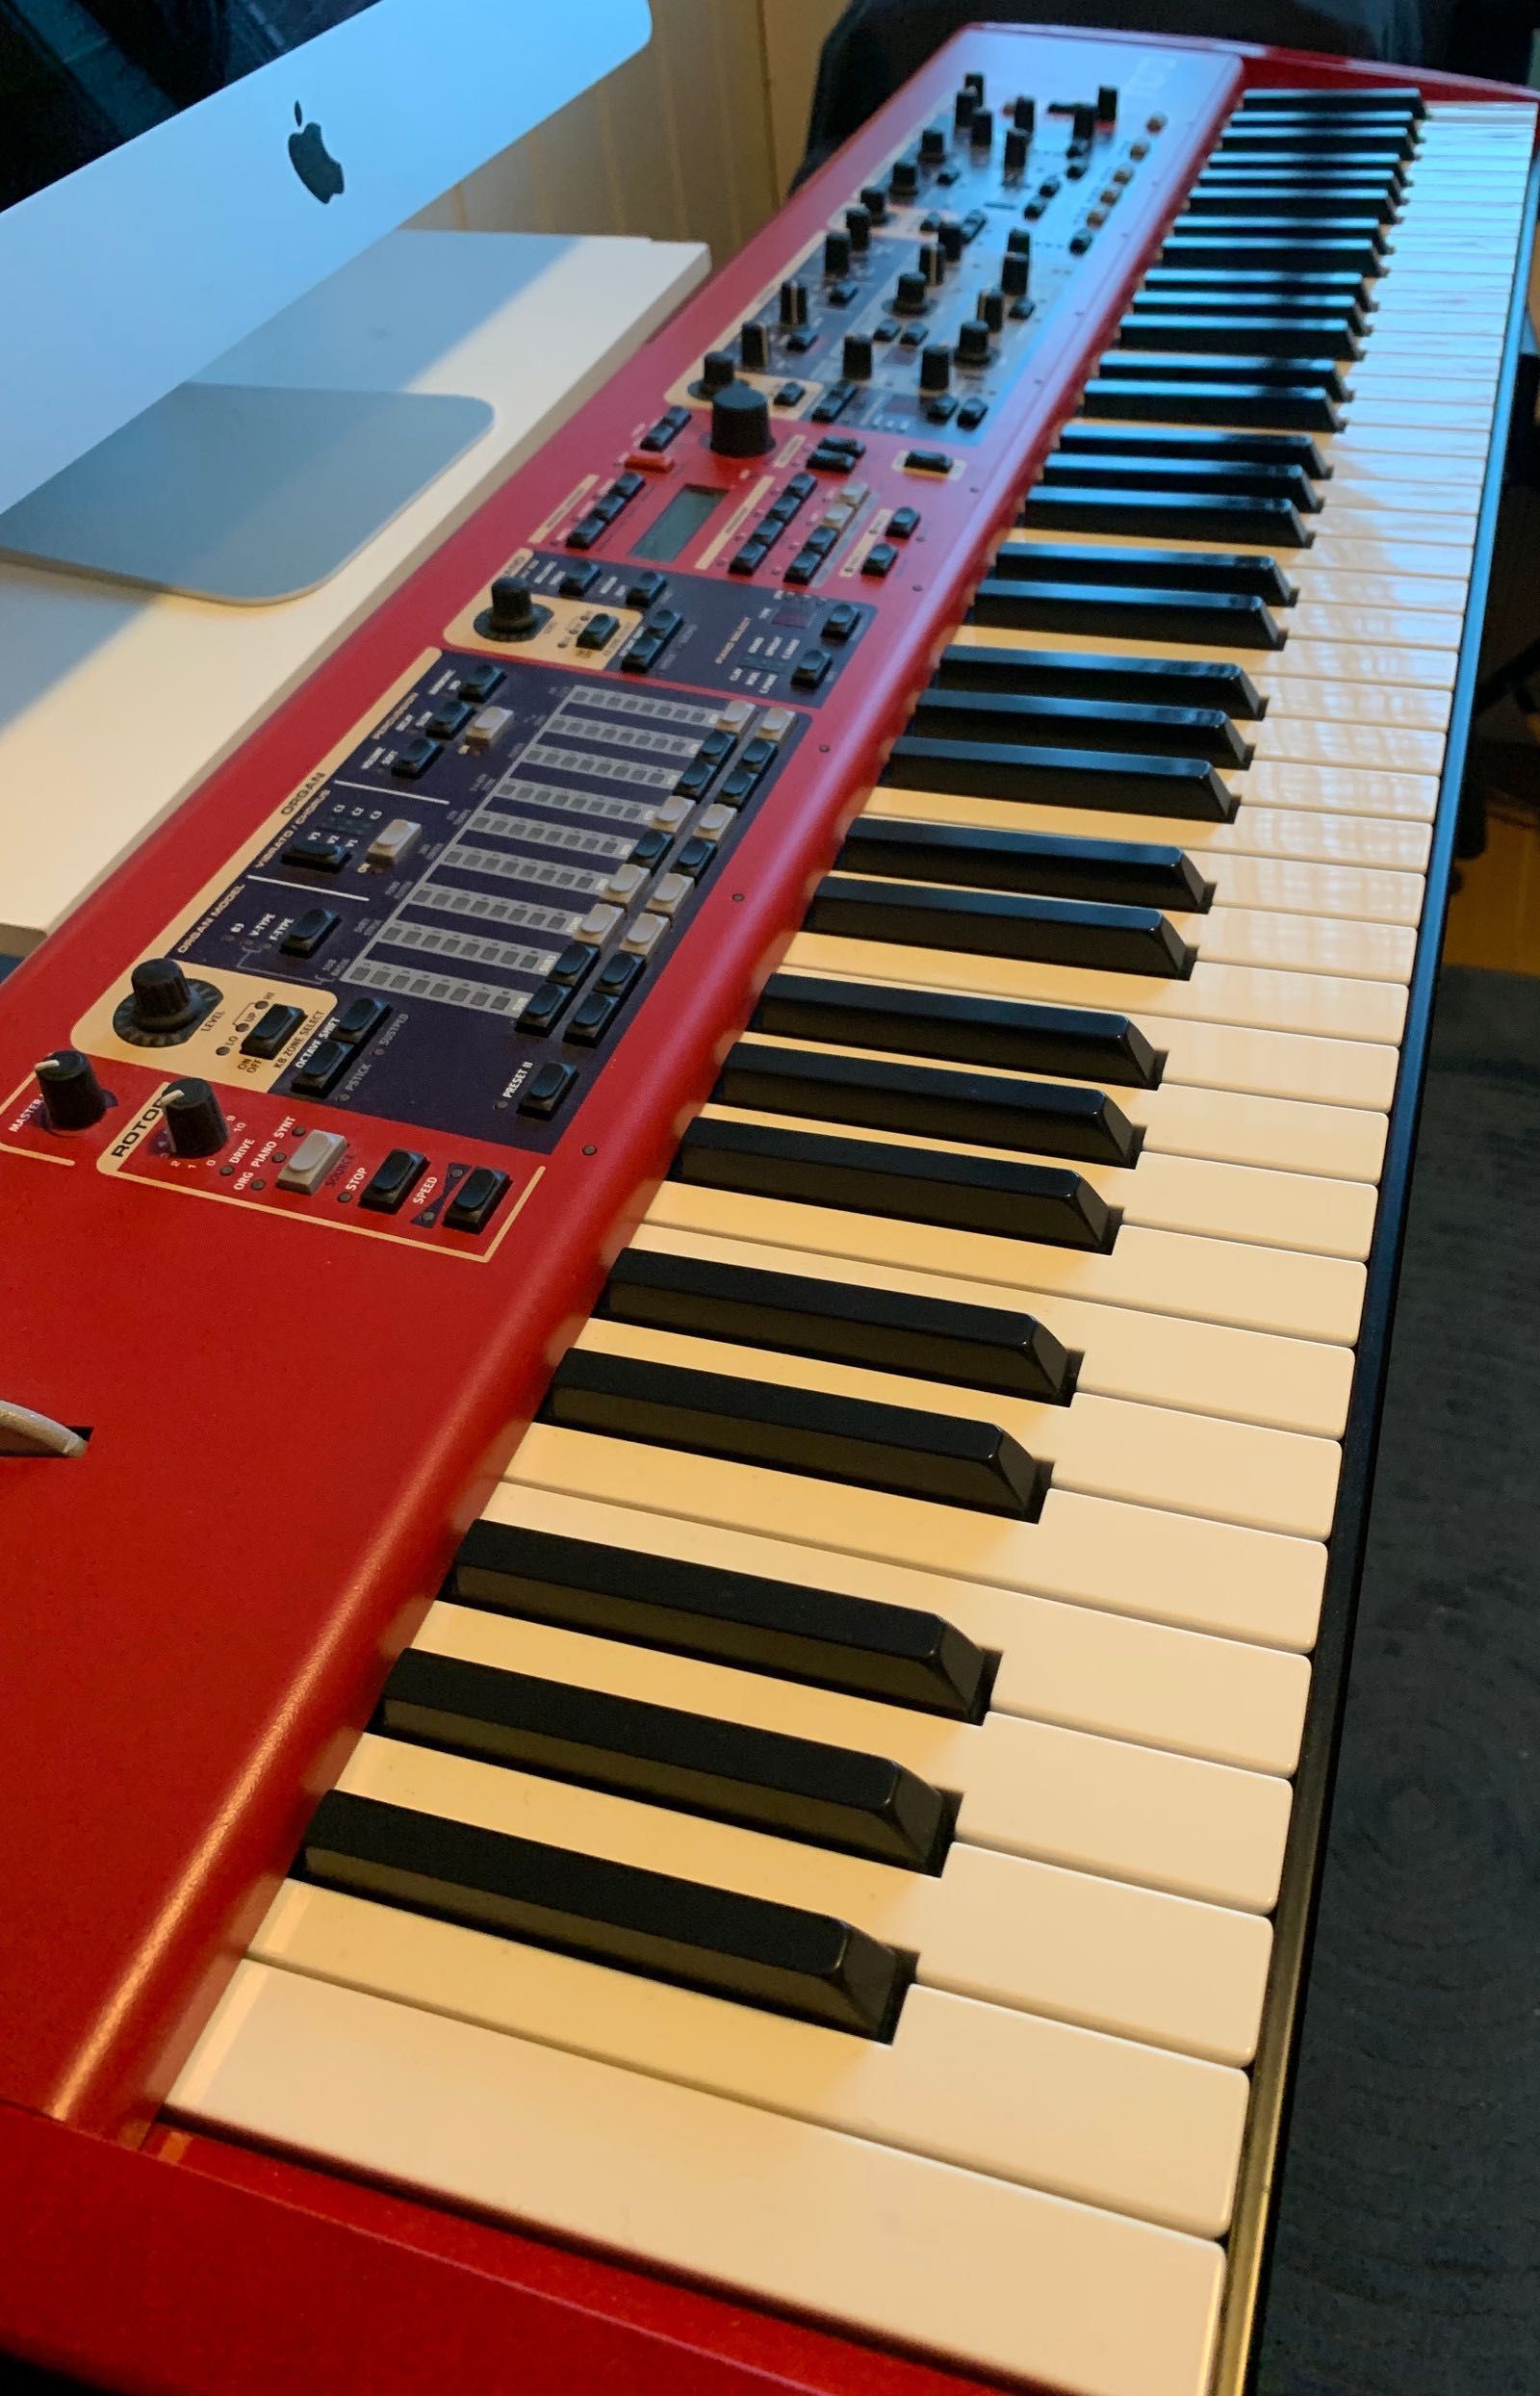 Nord Stage 76 revision B